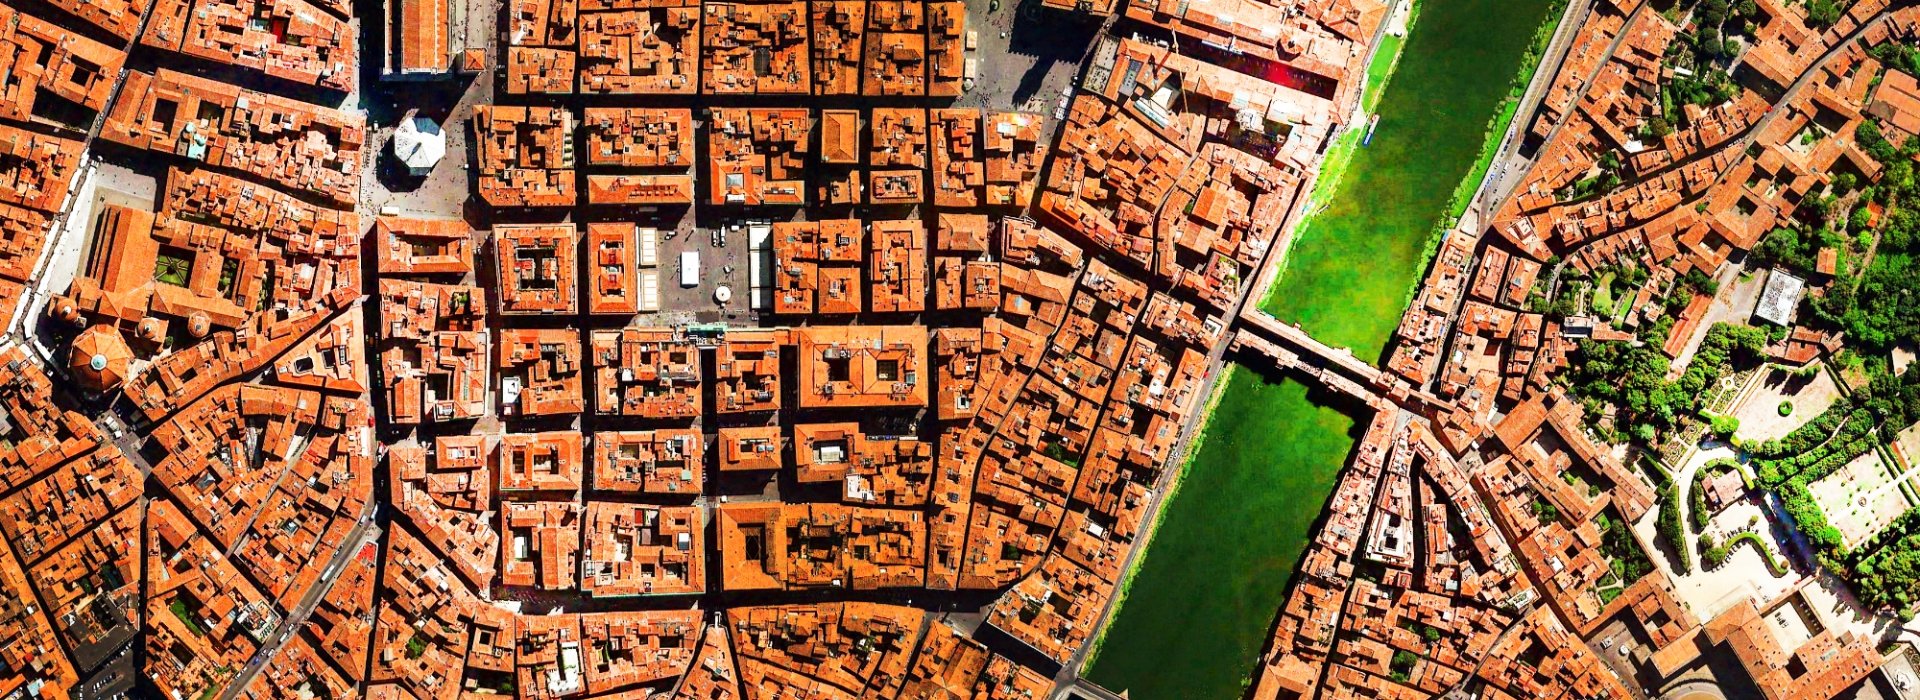 Florence from above - Giacomo Piccardi Tour Guide